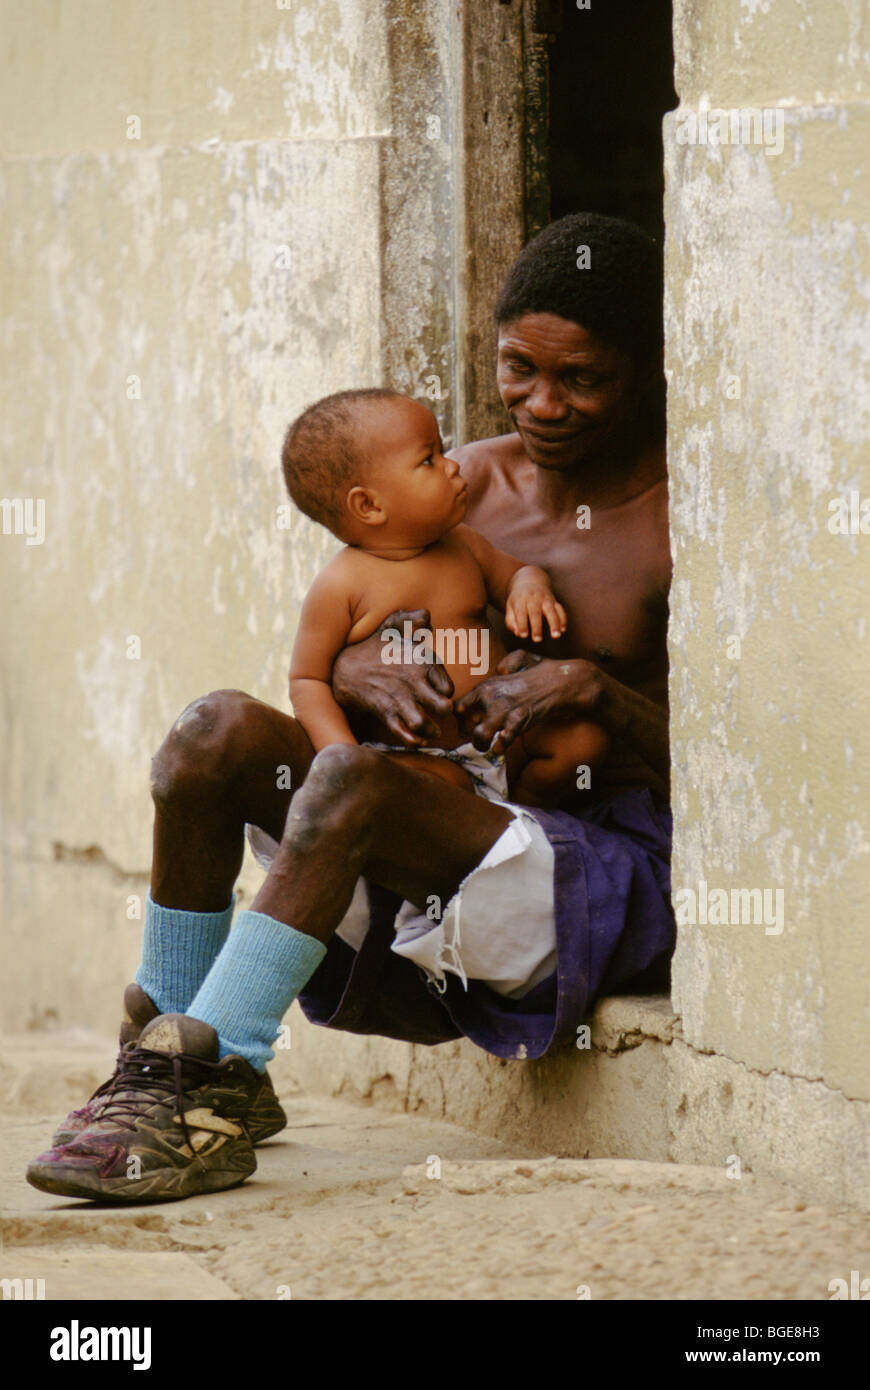 A resident in a leper colony in Luanda, Angola, holds his young son. Stock Photo